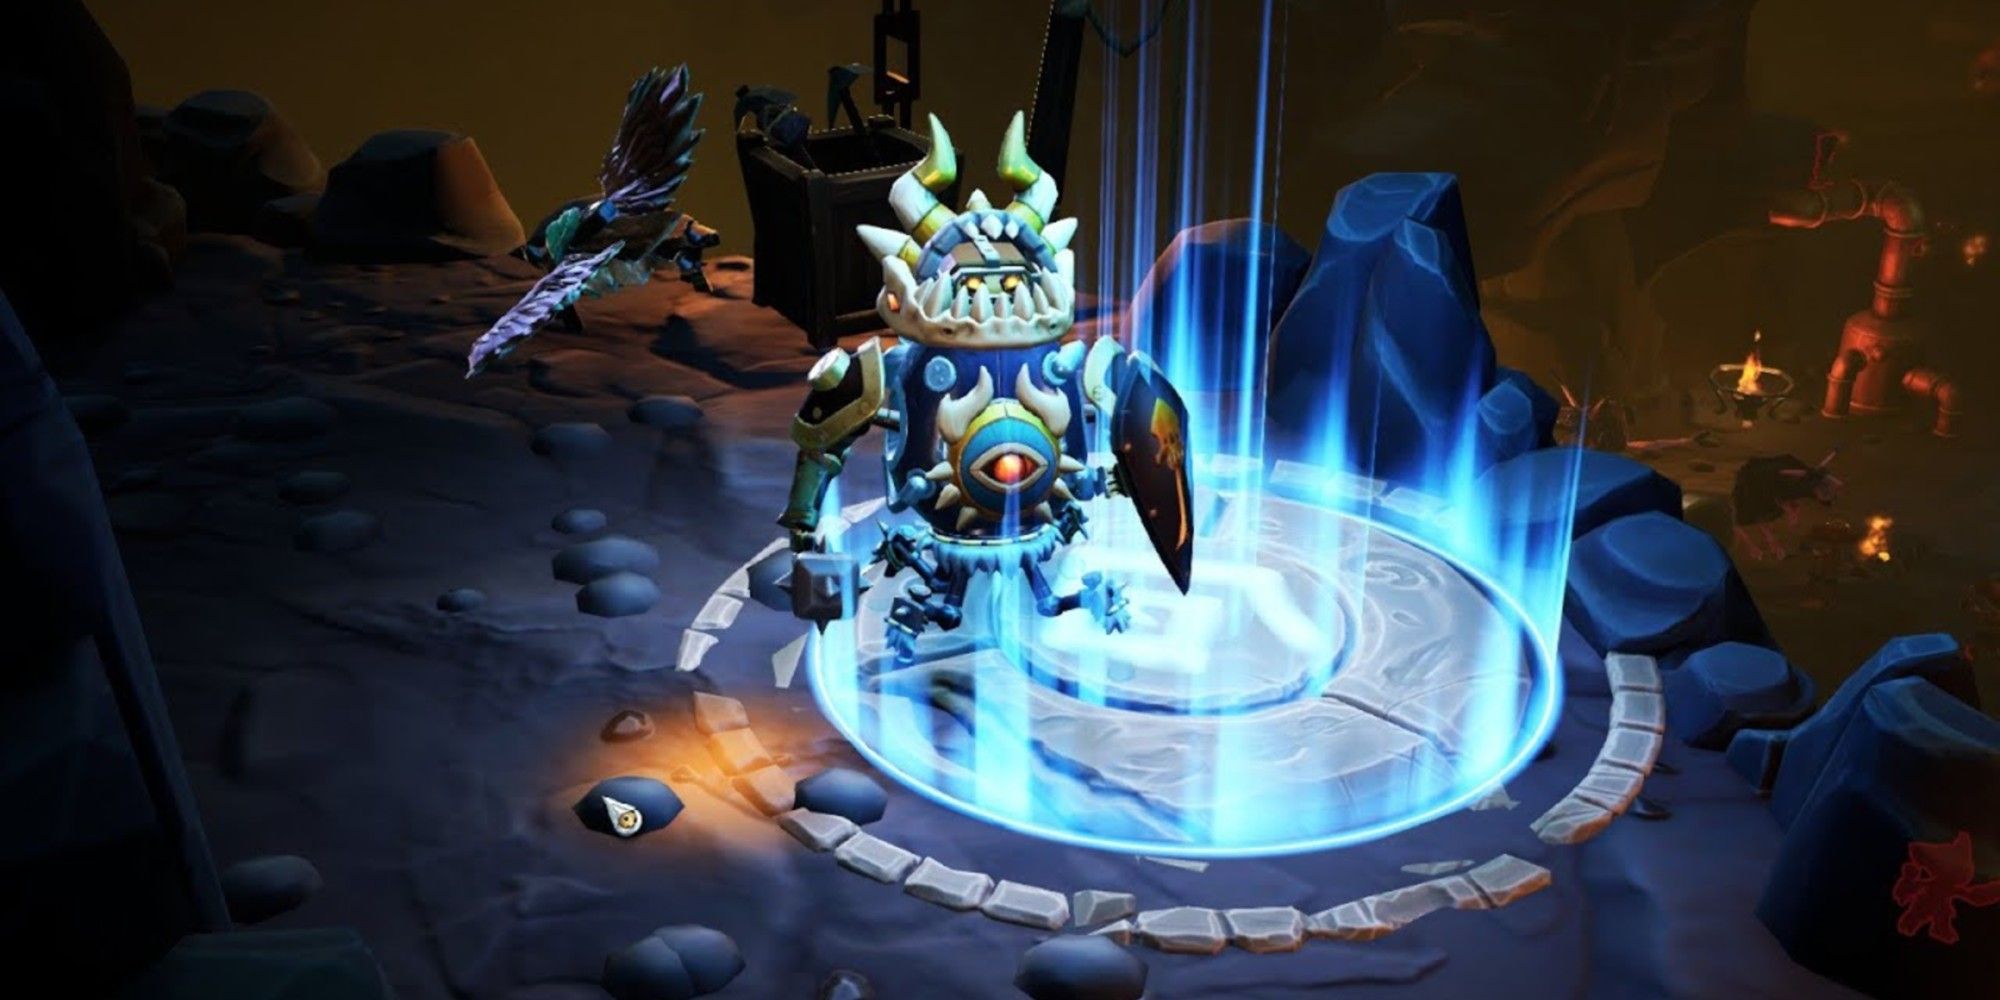 The Forged enters the battlefield in Torchlight 3